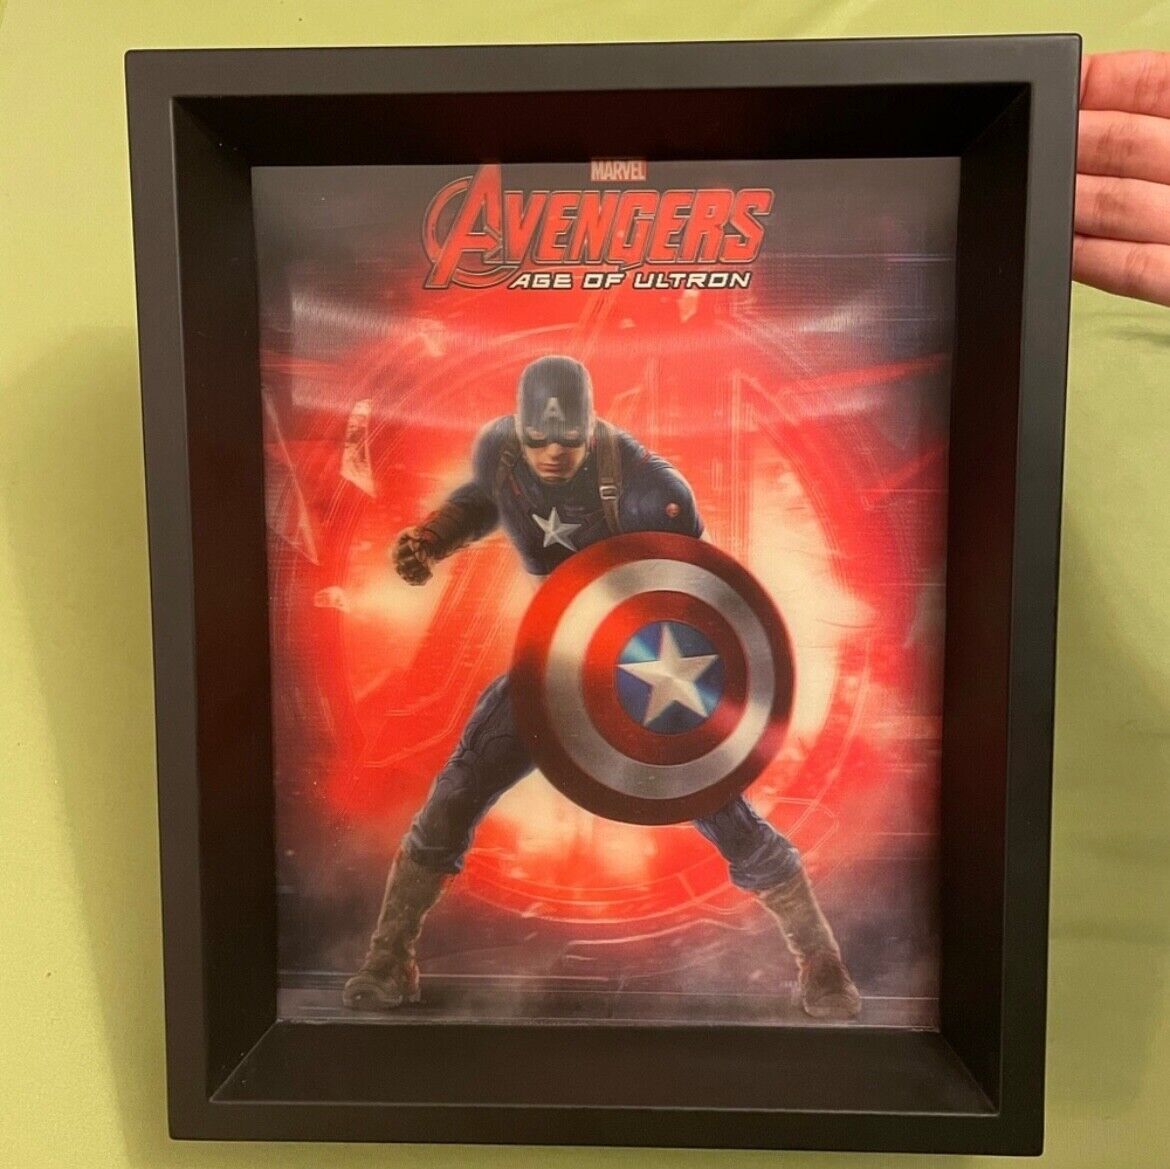 Avengers age of ultron Captain America 3-D HOLOGRAM 11X9 FRAMED PICTURE PYRAMID